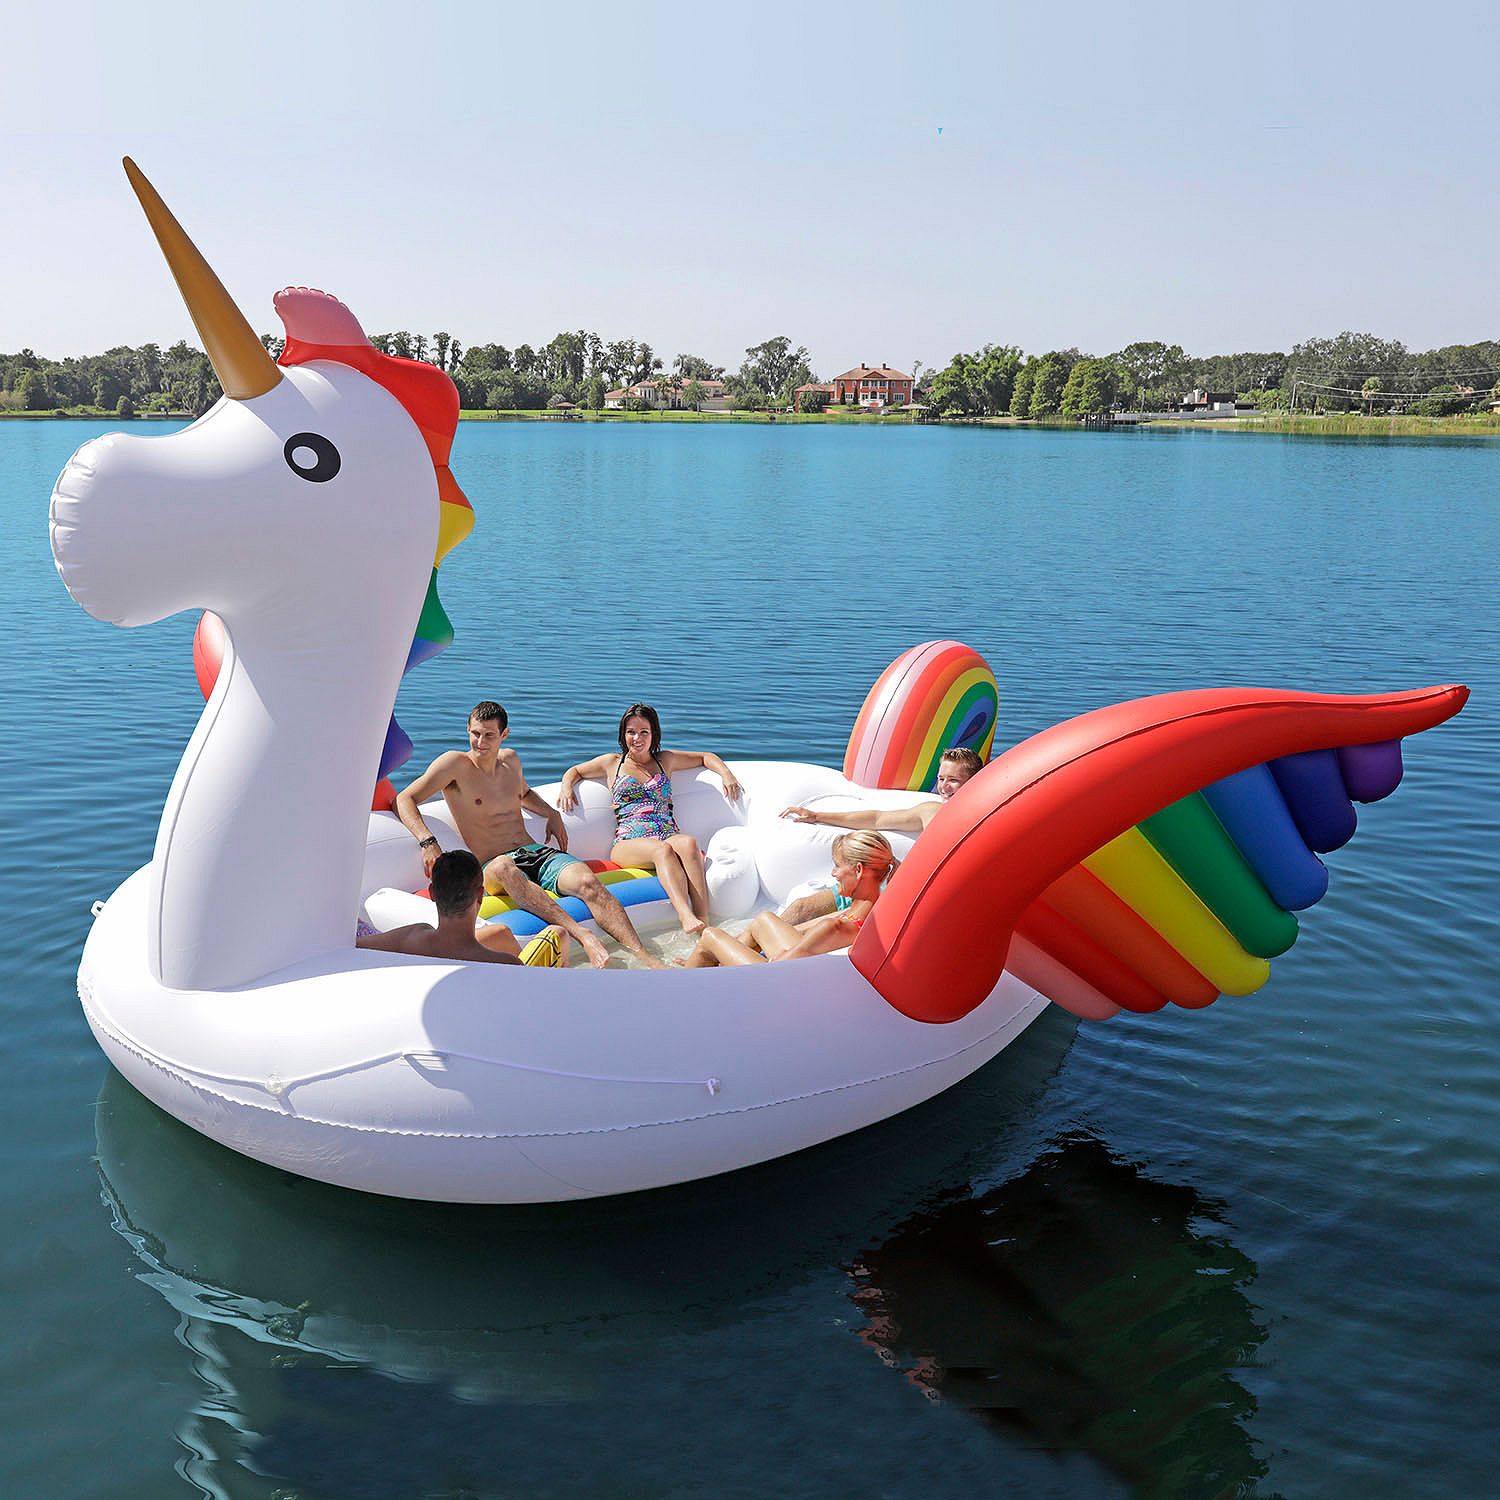 Start your summer right with a massive inflatable unicorn boat